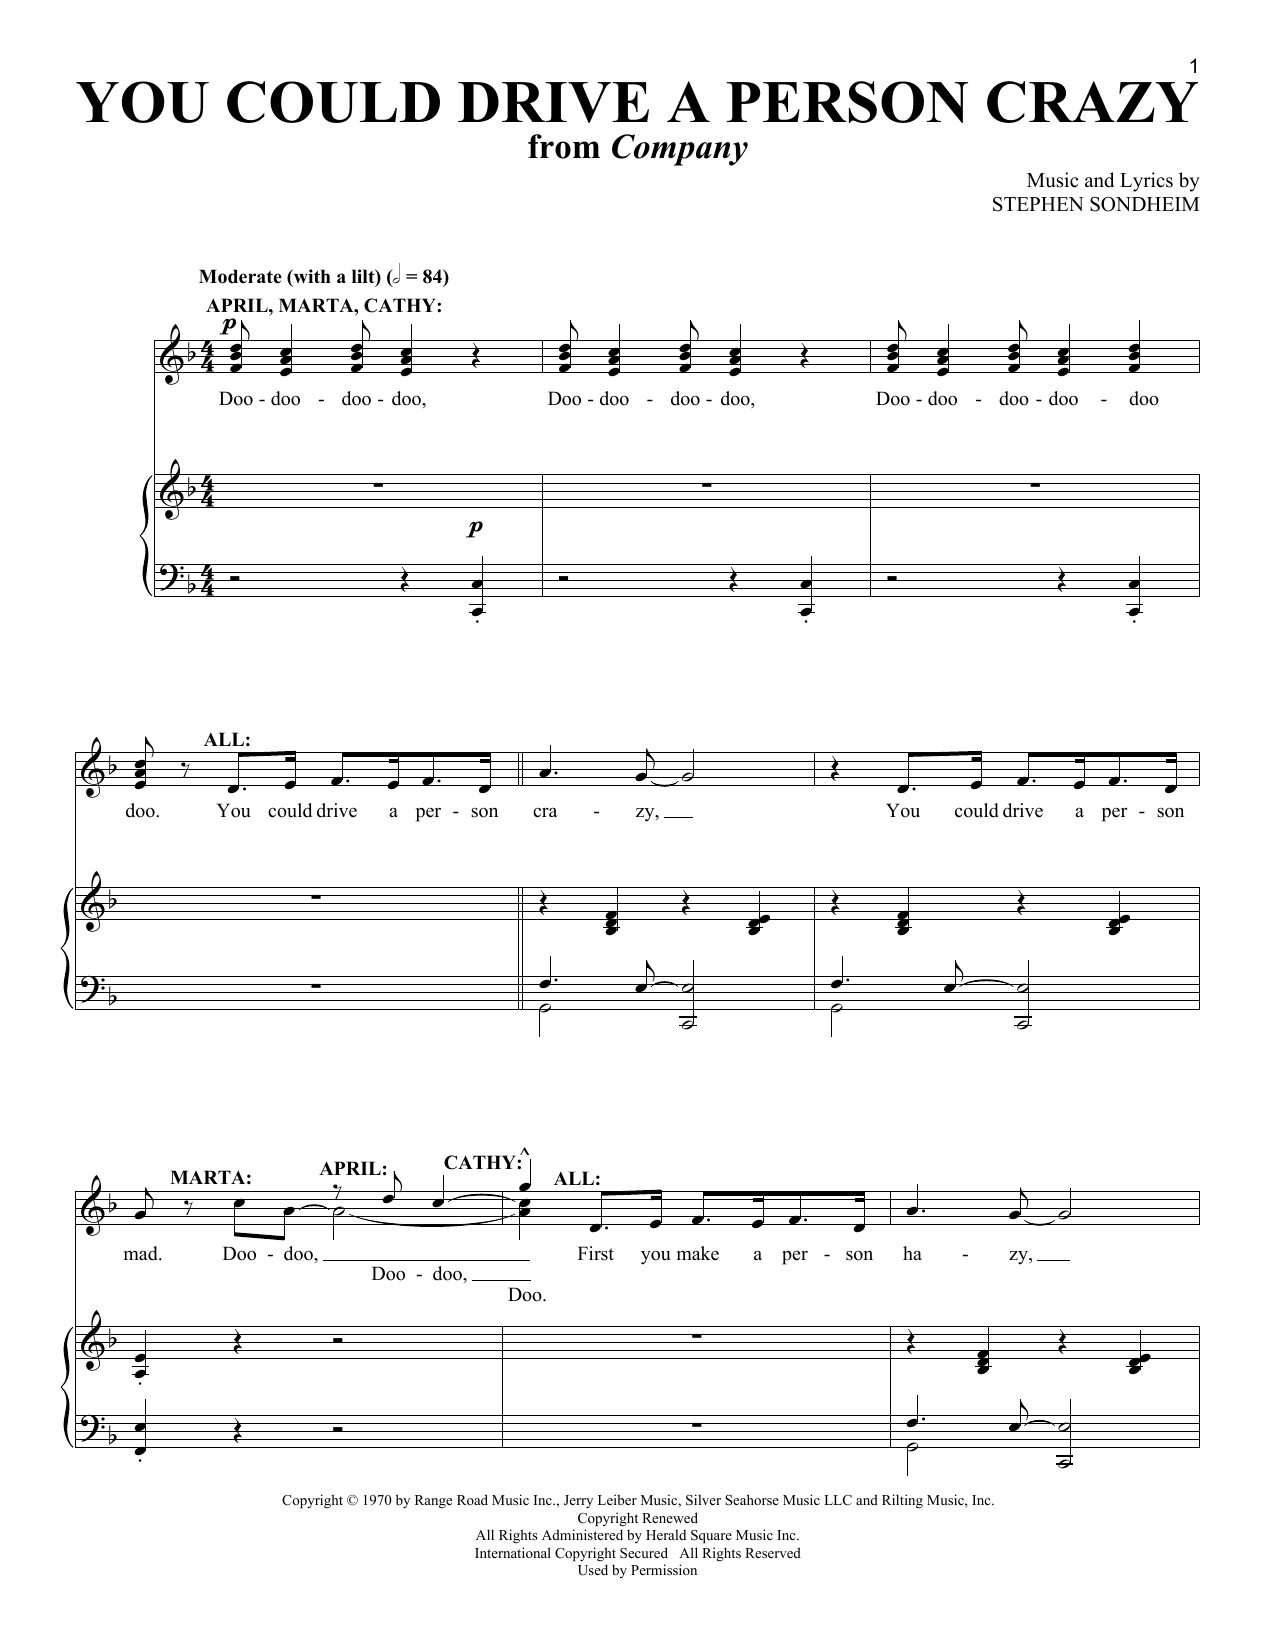 Stephen Sondheim You Could Drive A Person Crazy sheet music notes and chords. Download Printable PDF.